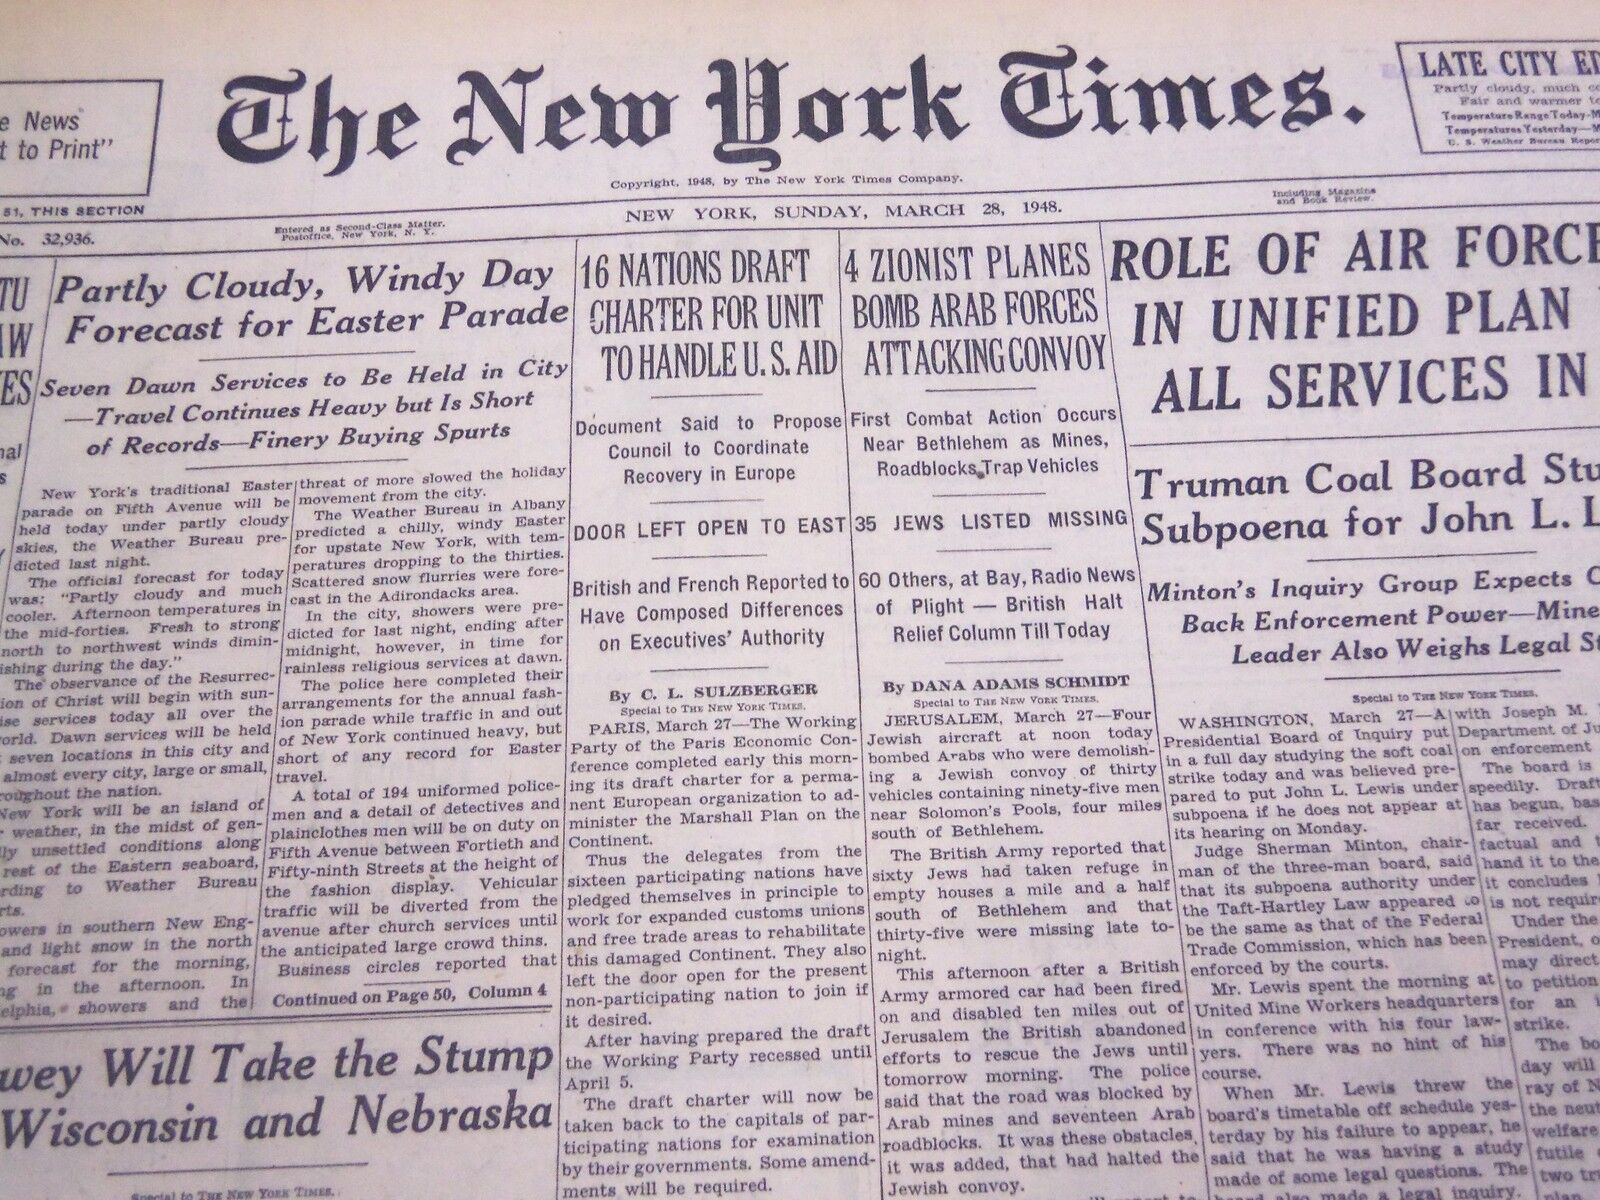 1948 MARCH 28 NEW YORK TIMES - ZIONIST PLANES BOMB ARAB FORCES - NT 4380